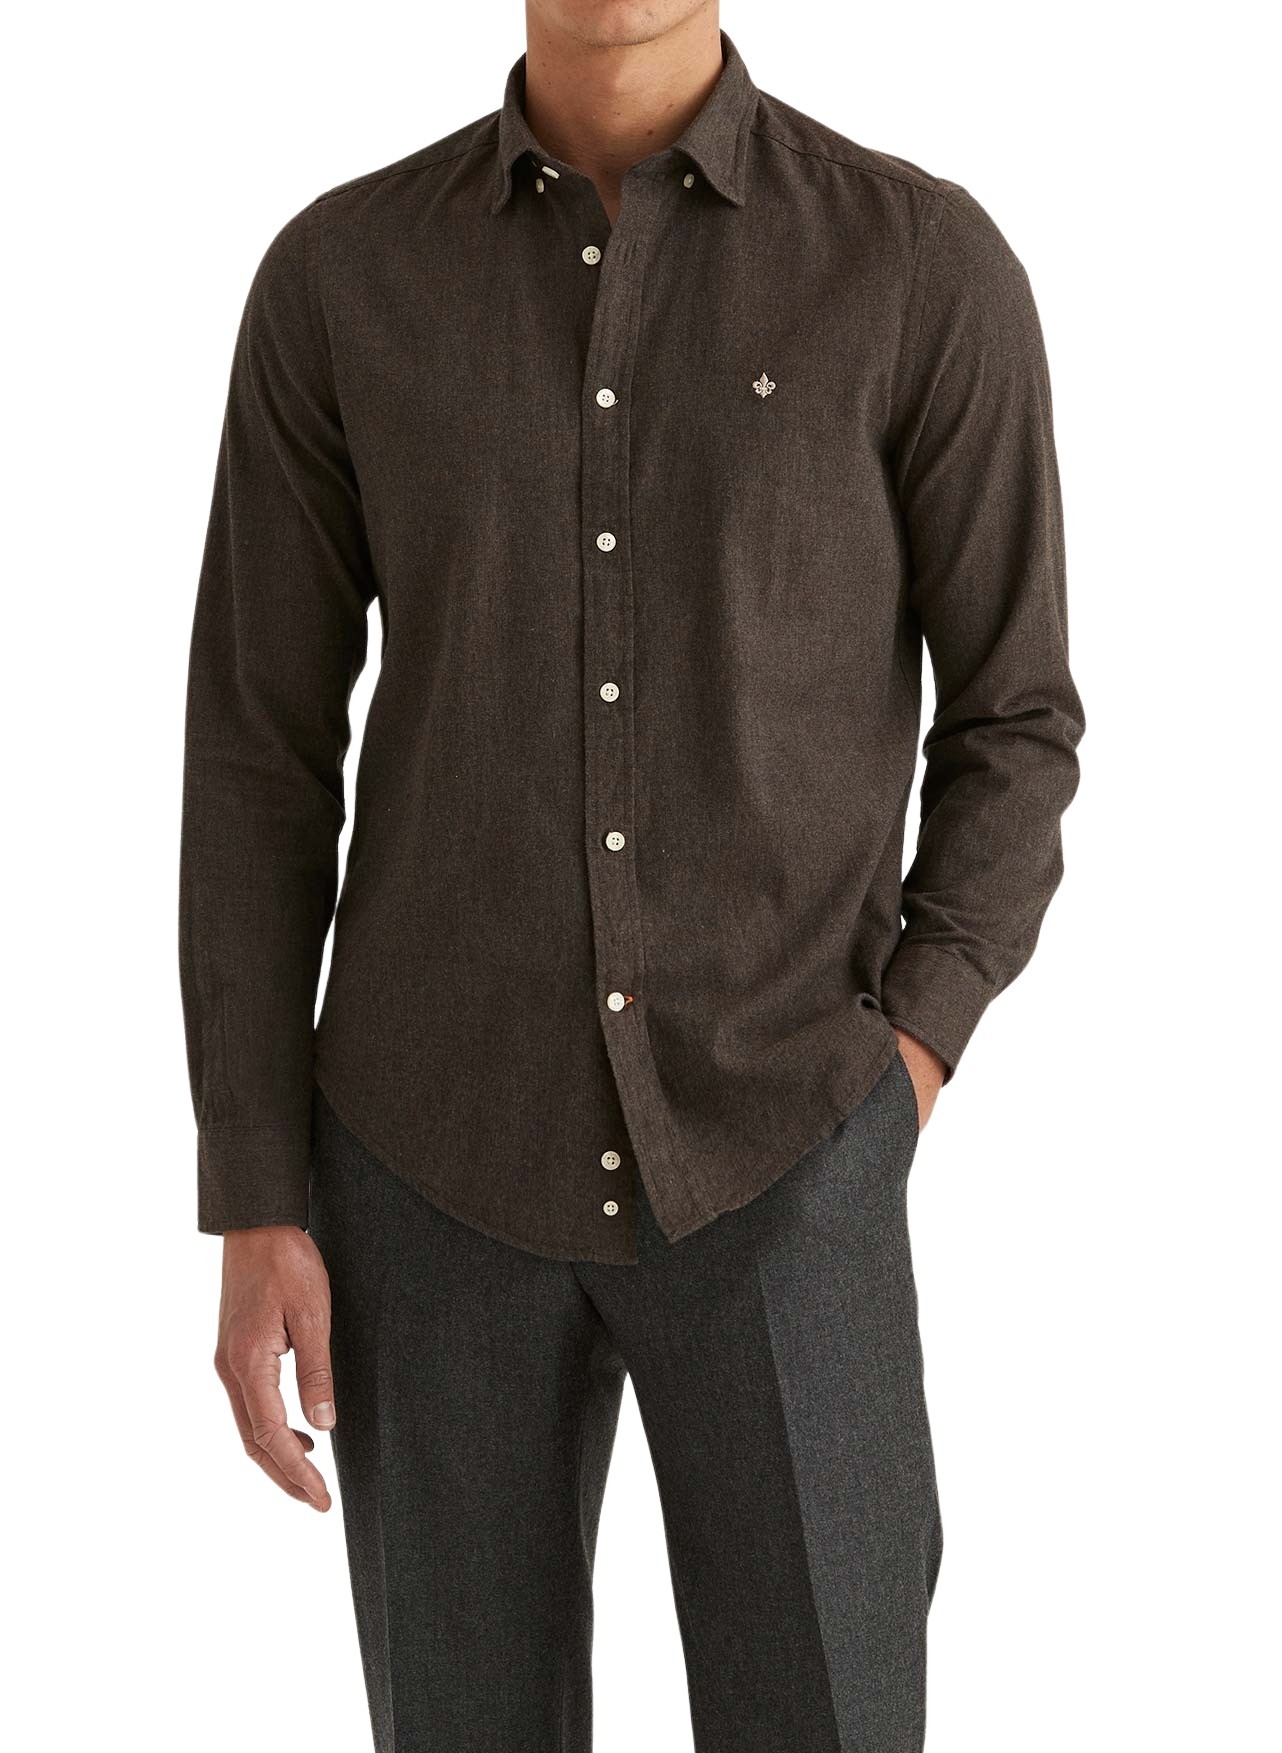 801638-watts-flannel-shirt-slim-fit-80-brown-extra-1